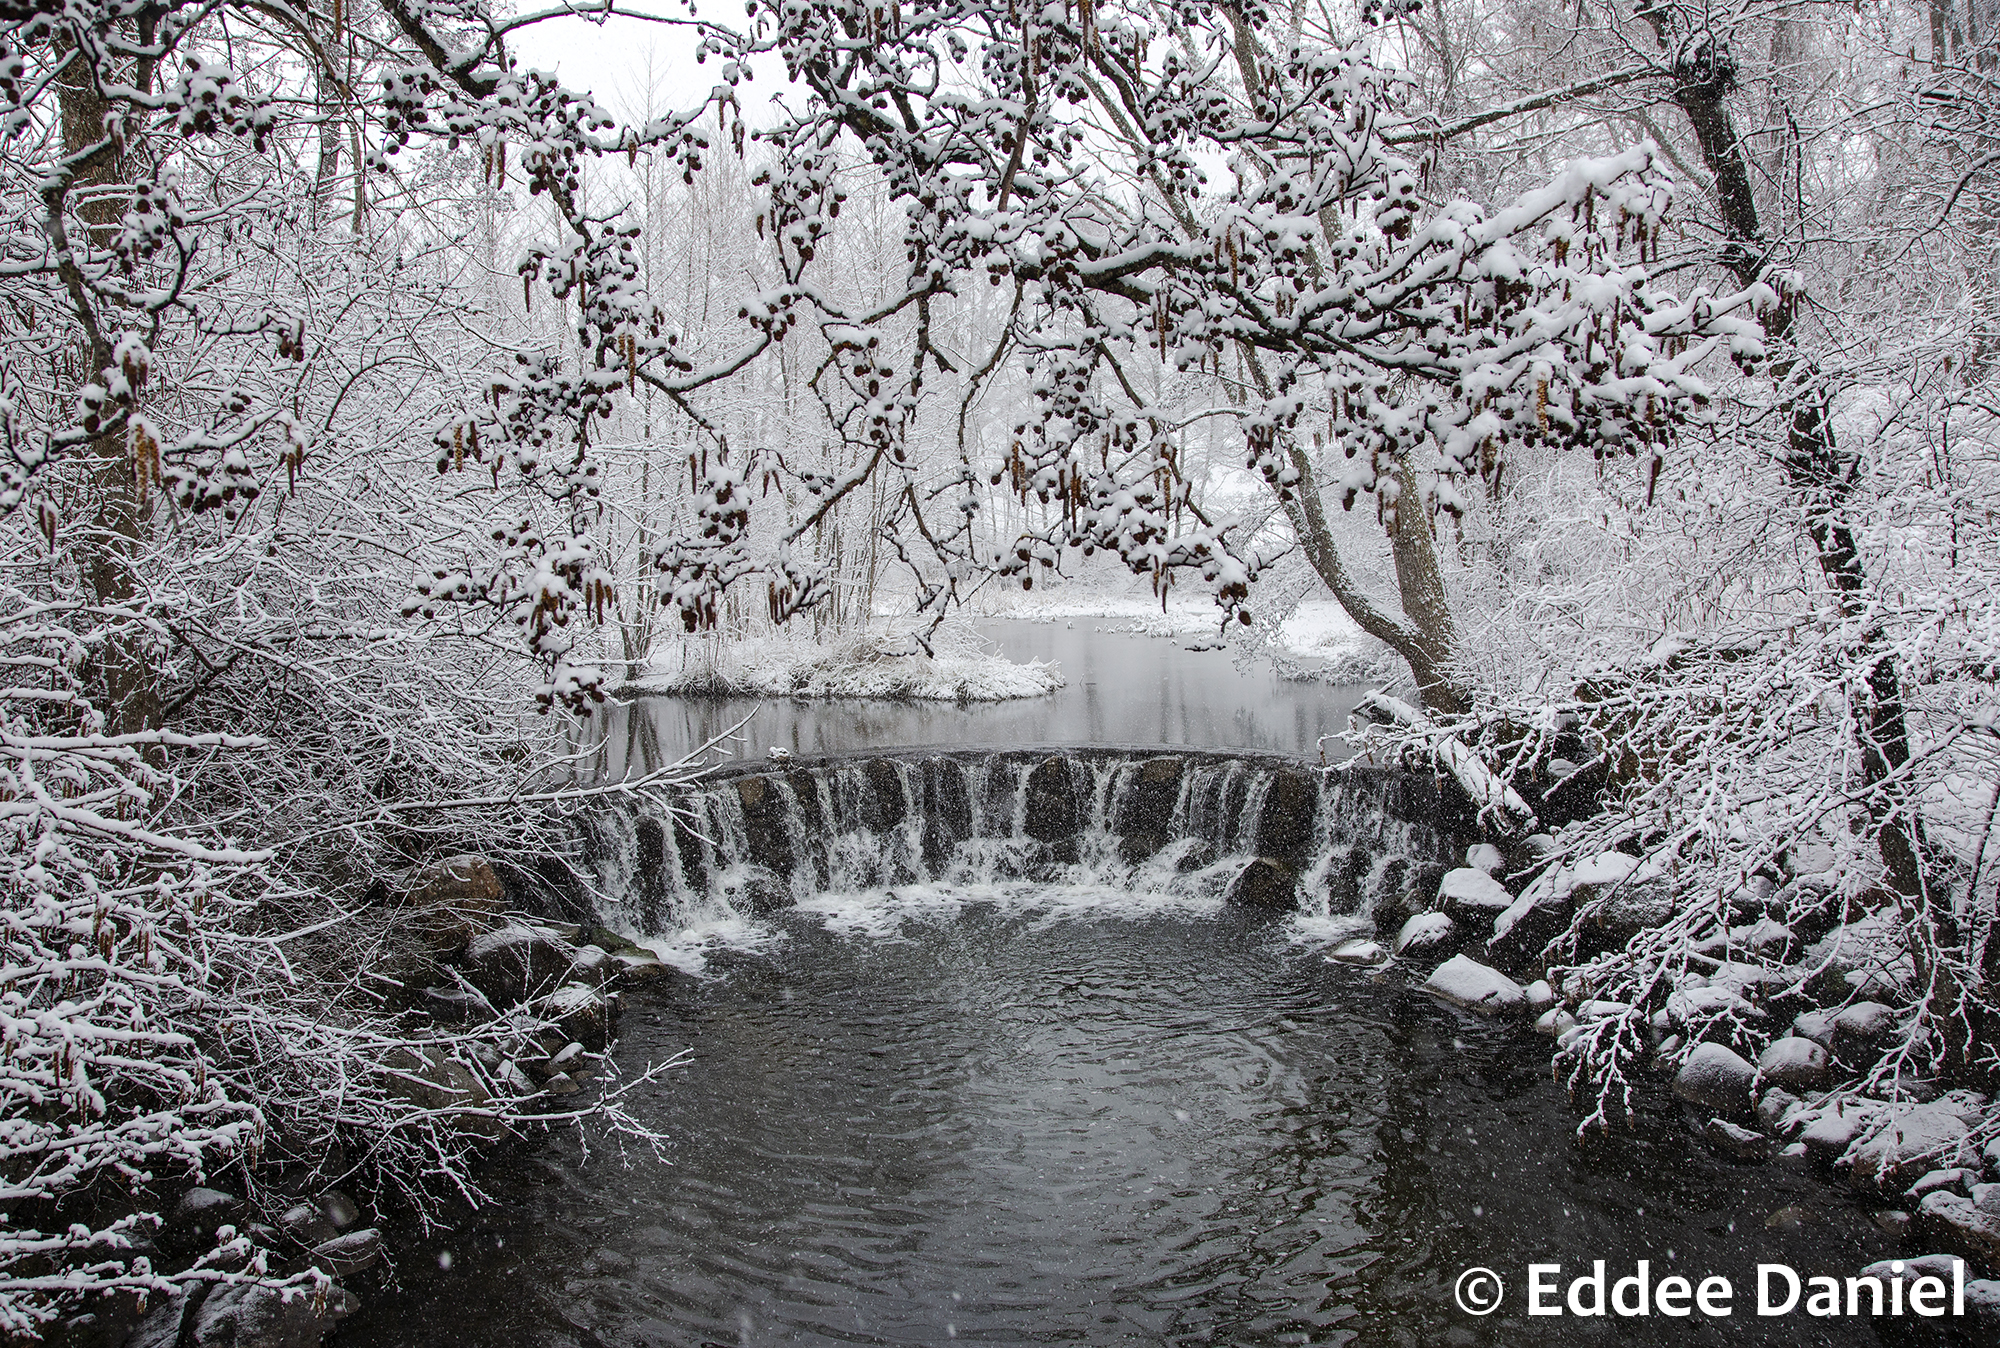 A small waterfall surrounded by snowy tree branches